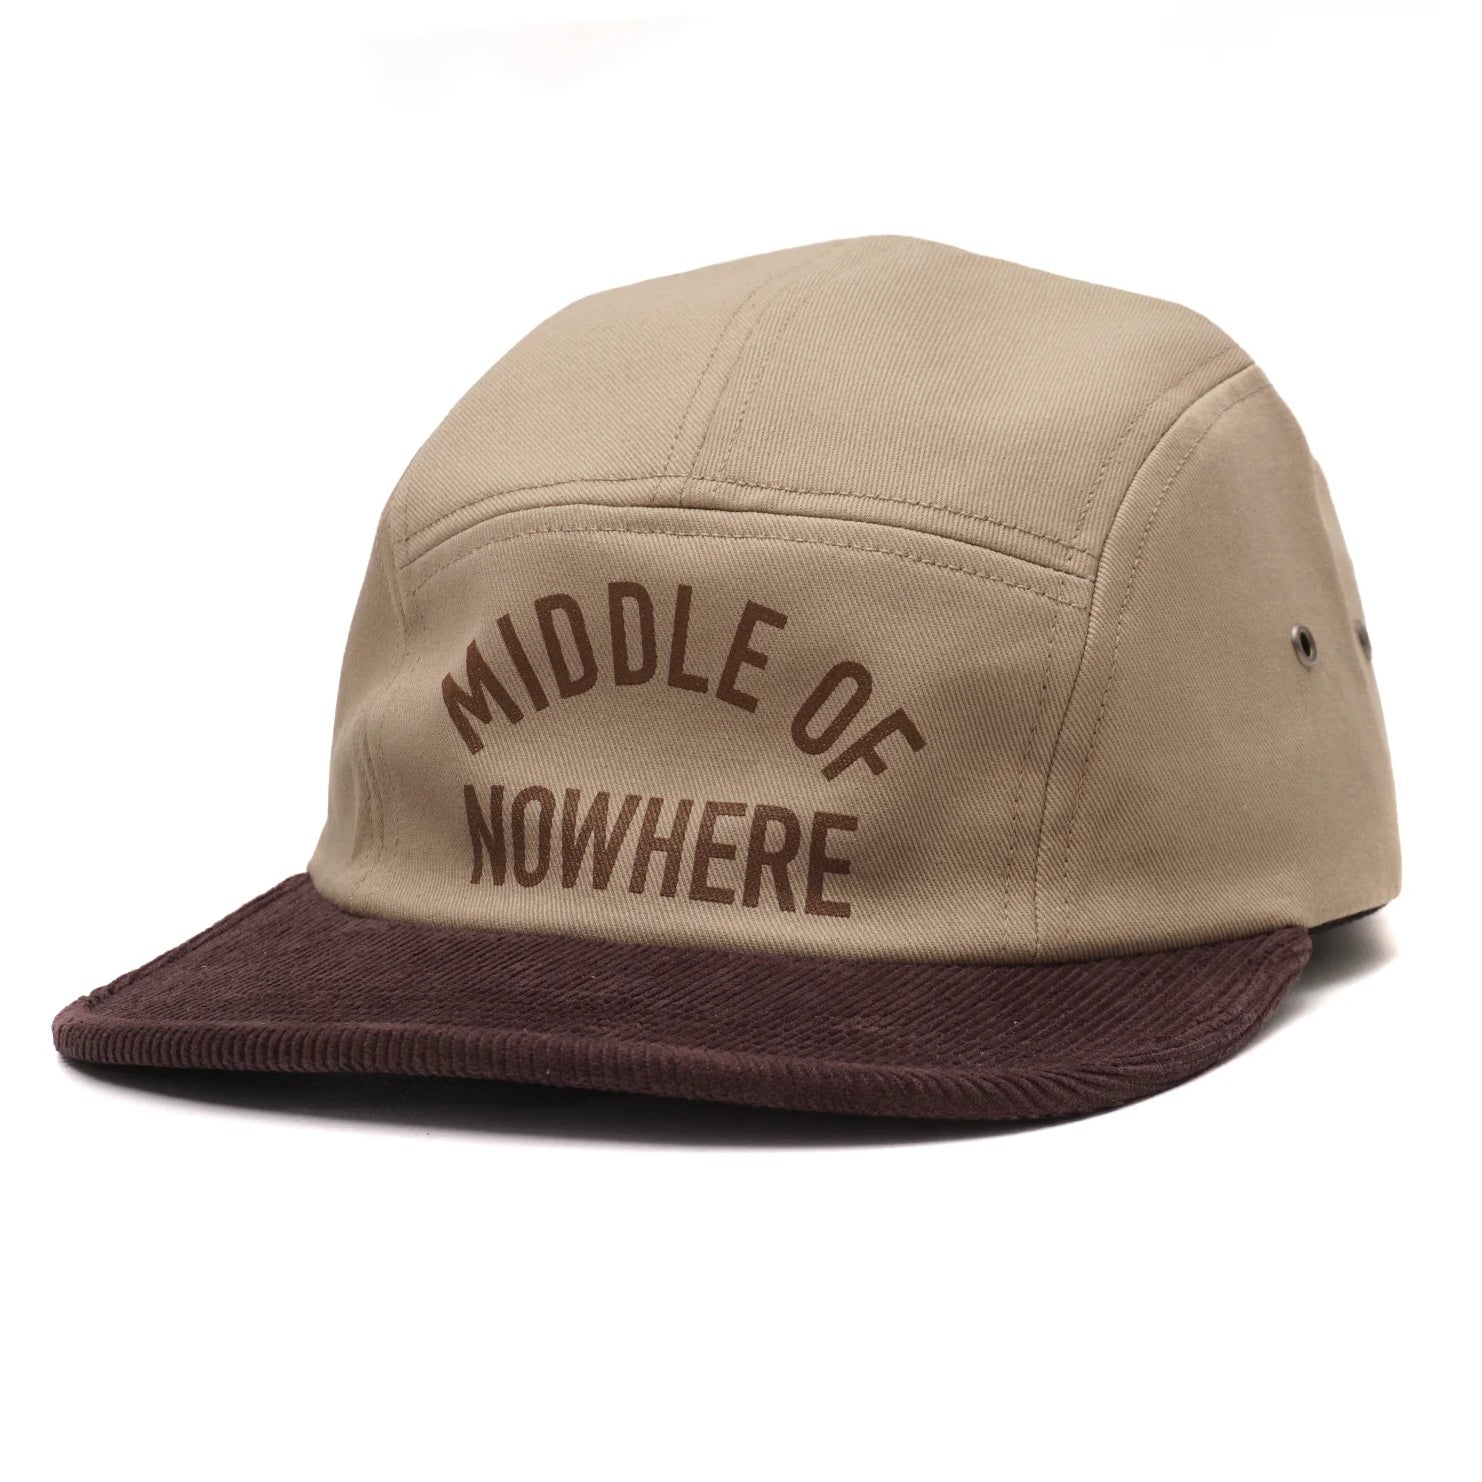 The Quiet Life Middle of Nowhere 5 Panel Camper Hat Tan hats The Quiet Life 